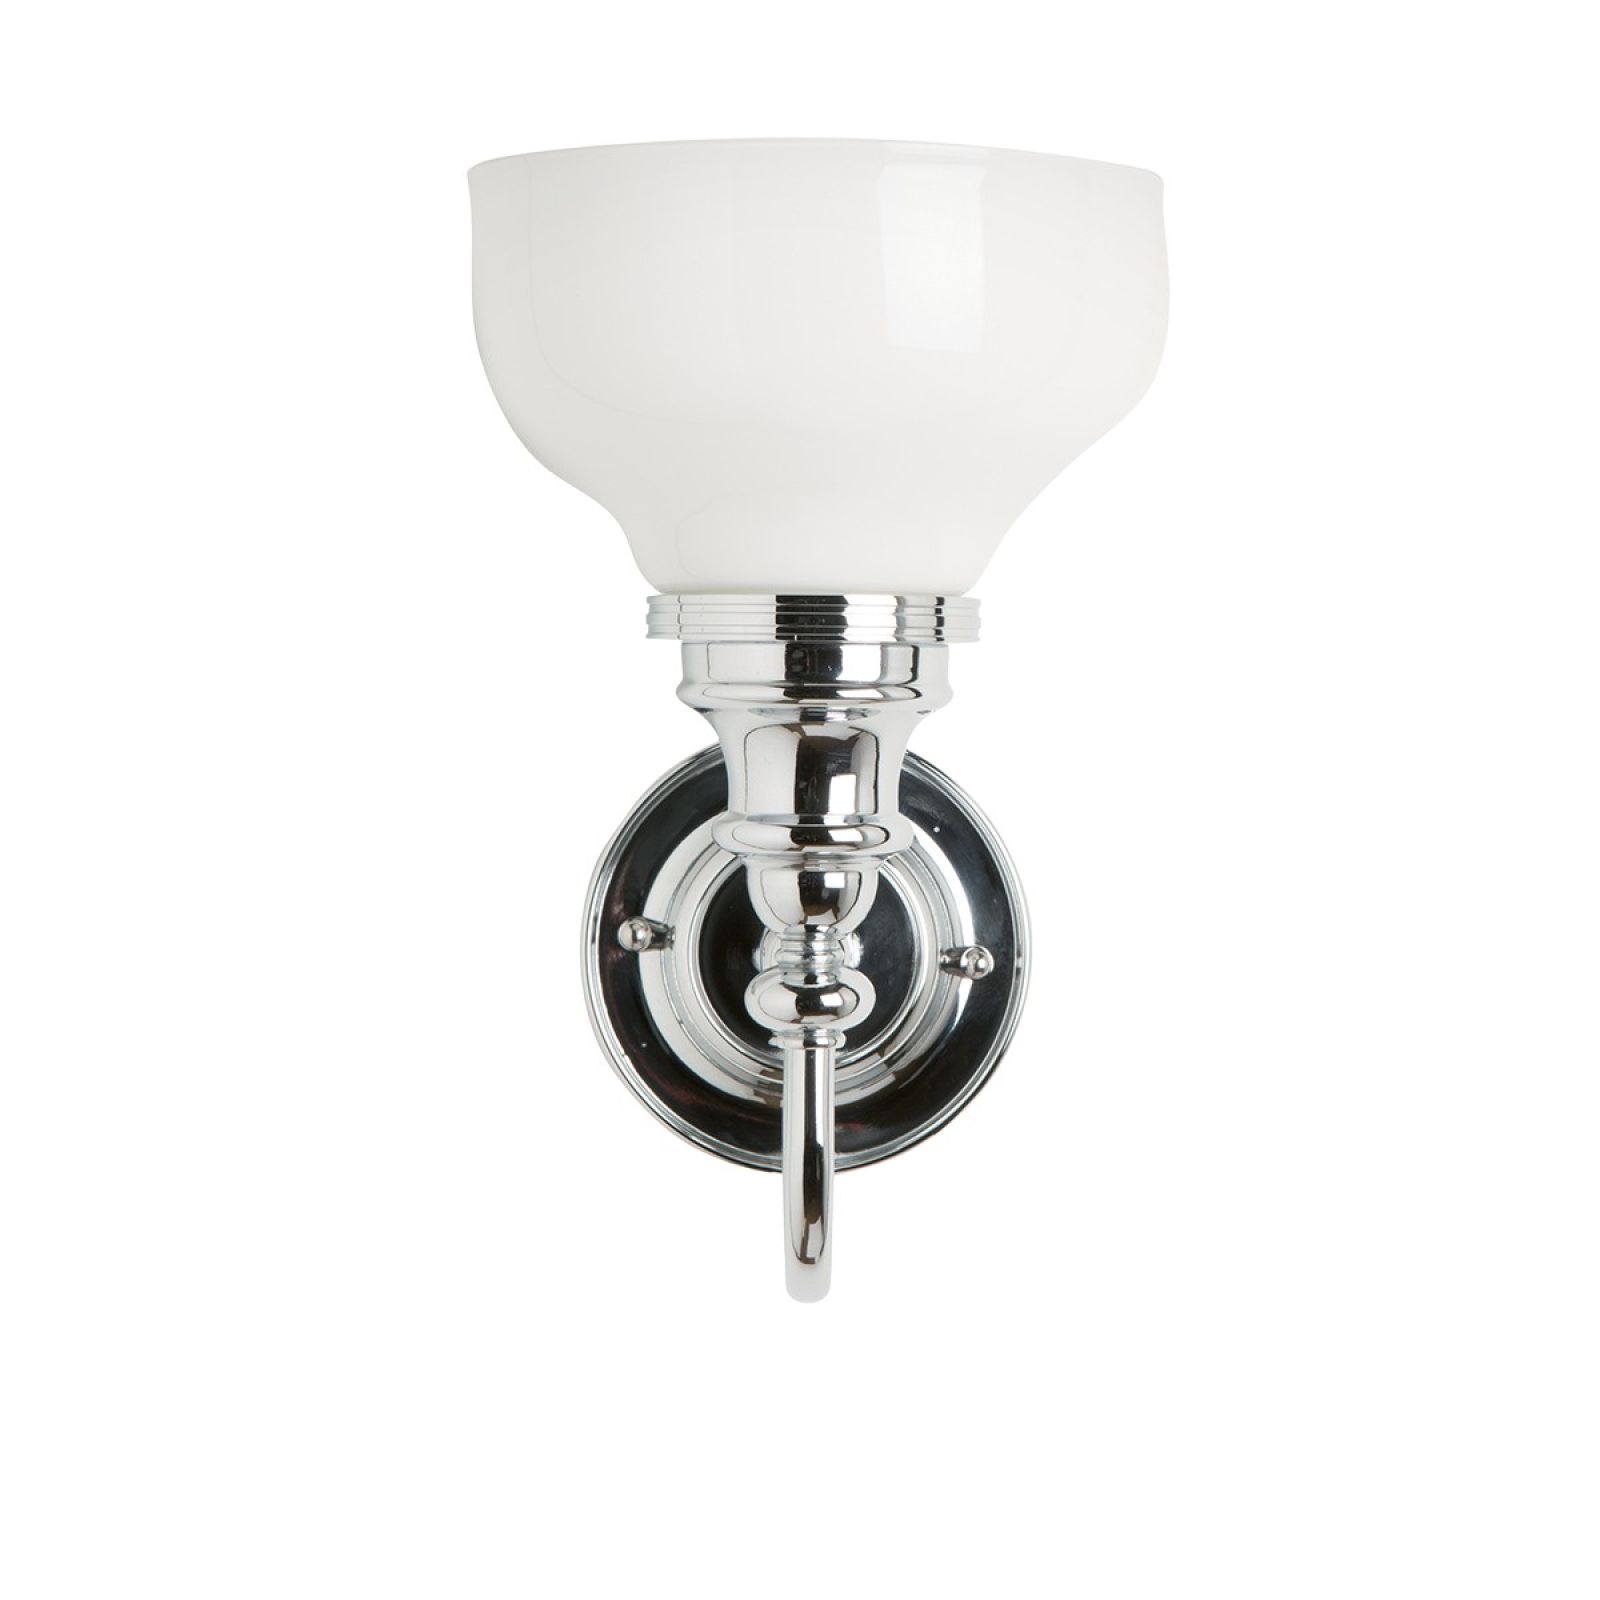 Frosted cup light with chrome finial base